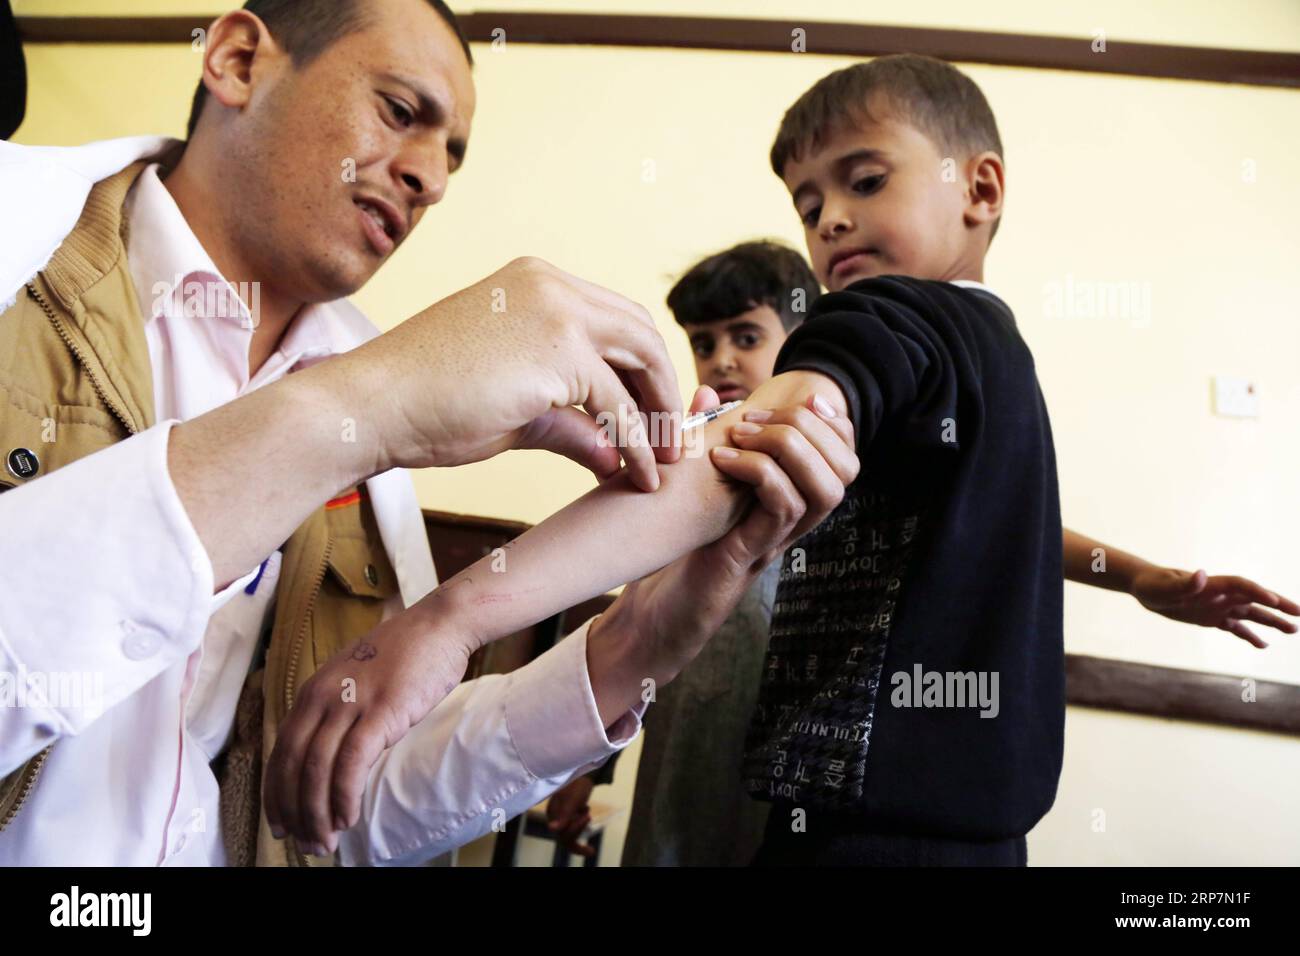 (190209) -- SANAA, Feb. 9, 2019 -- A medic gives a child an anti-measles and rubella vaccine at a vaccination center in Sanaa, Yemen, Feb. 9, 2019. A National Measles and Rubella Immunization Campaign kicked off on Saturday in Yemen and will last six days. The campaign targets Yemeni children from the age of six months to 15 years, according to the local media. Mohammed Mohammed) YEMEN-SANAA-MEASLES-RUBELLA-VACCINATION nieyunpeng PUBLICATIONxNOTxINxCHN Stock Photo